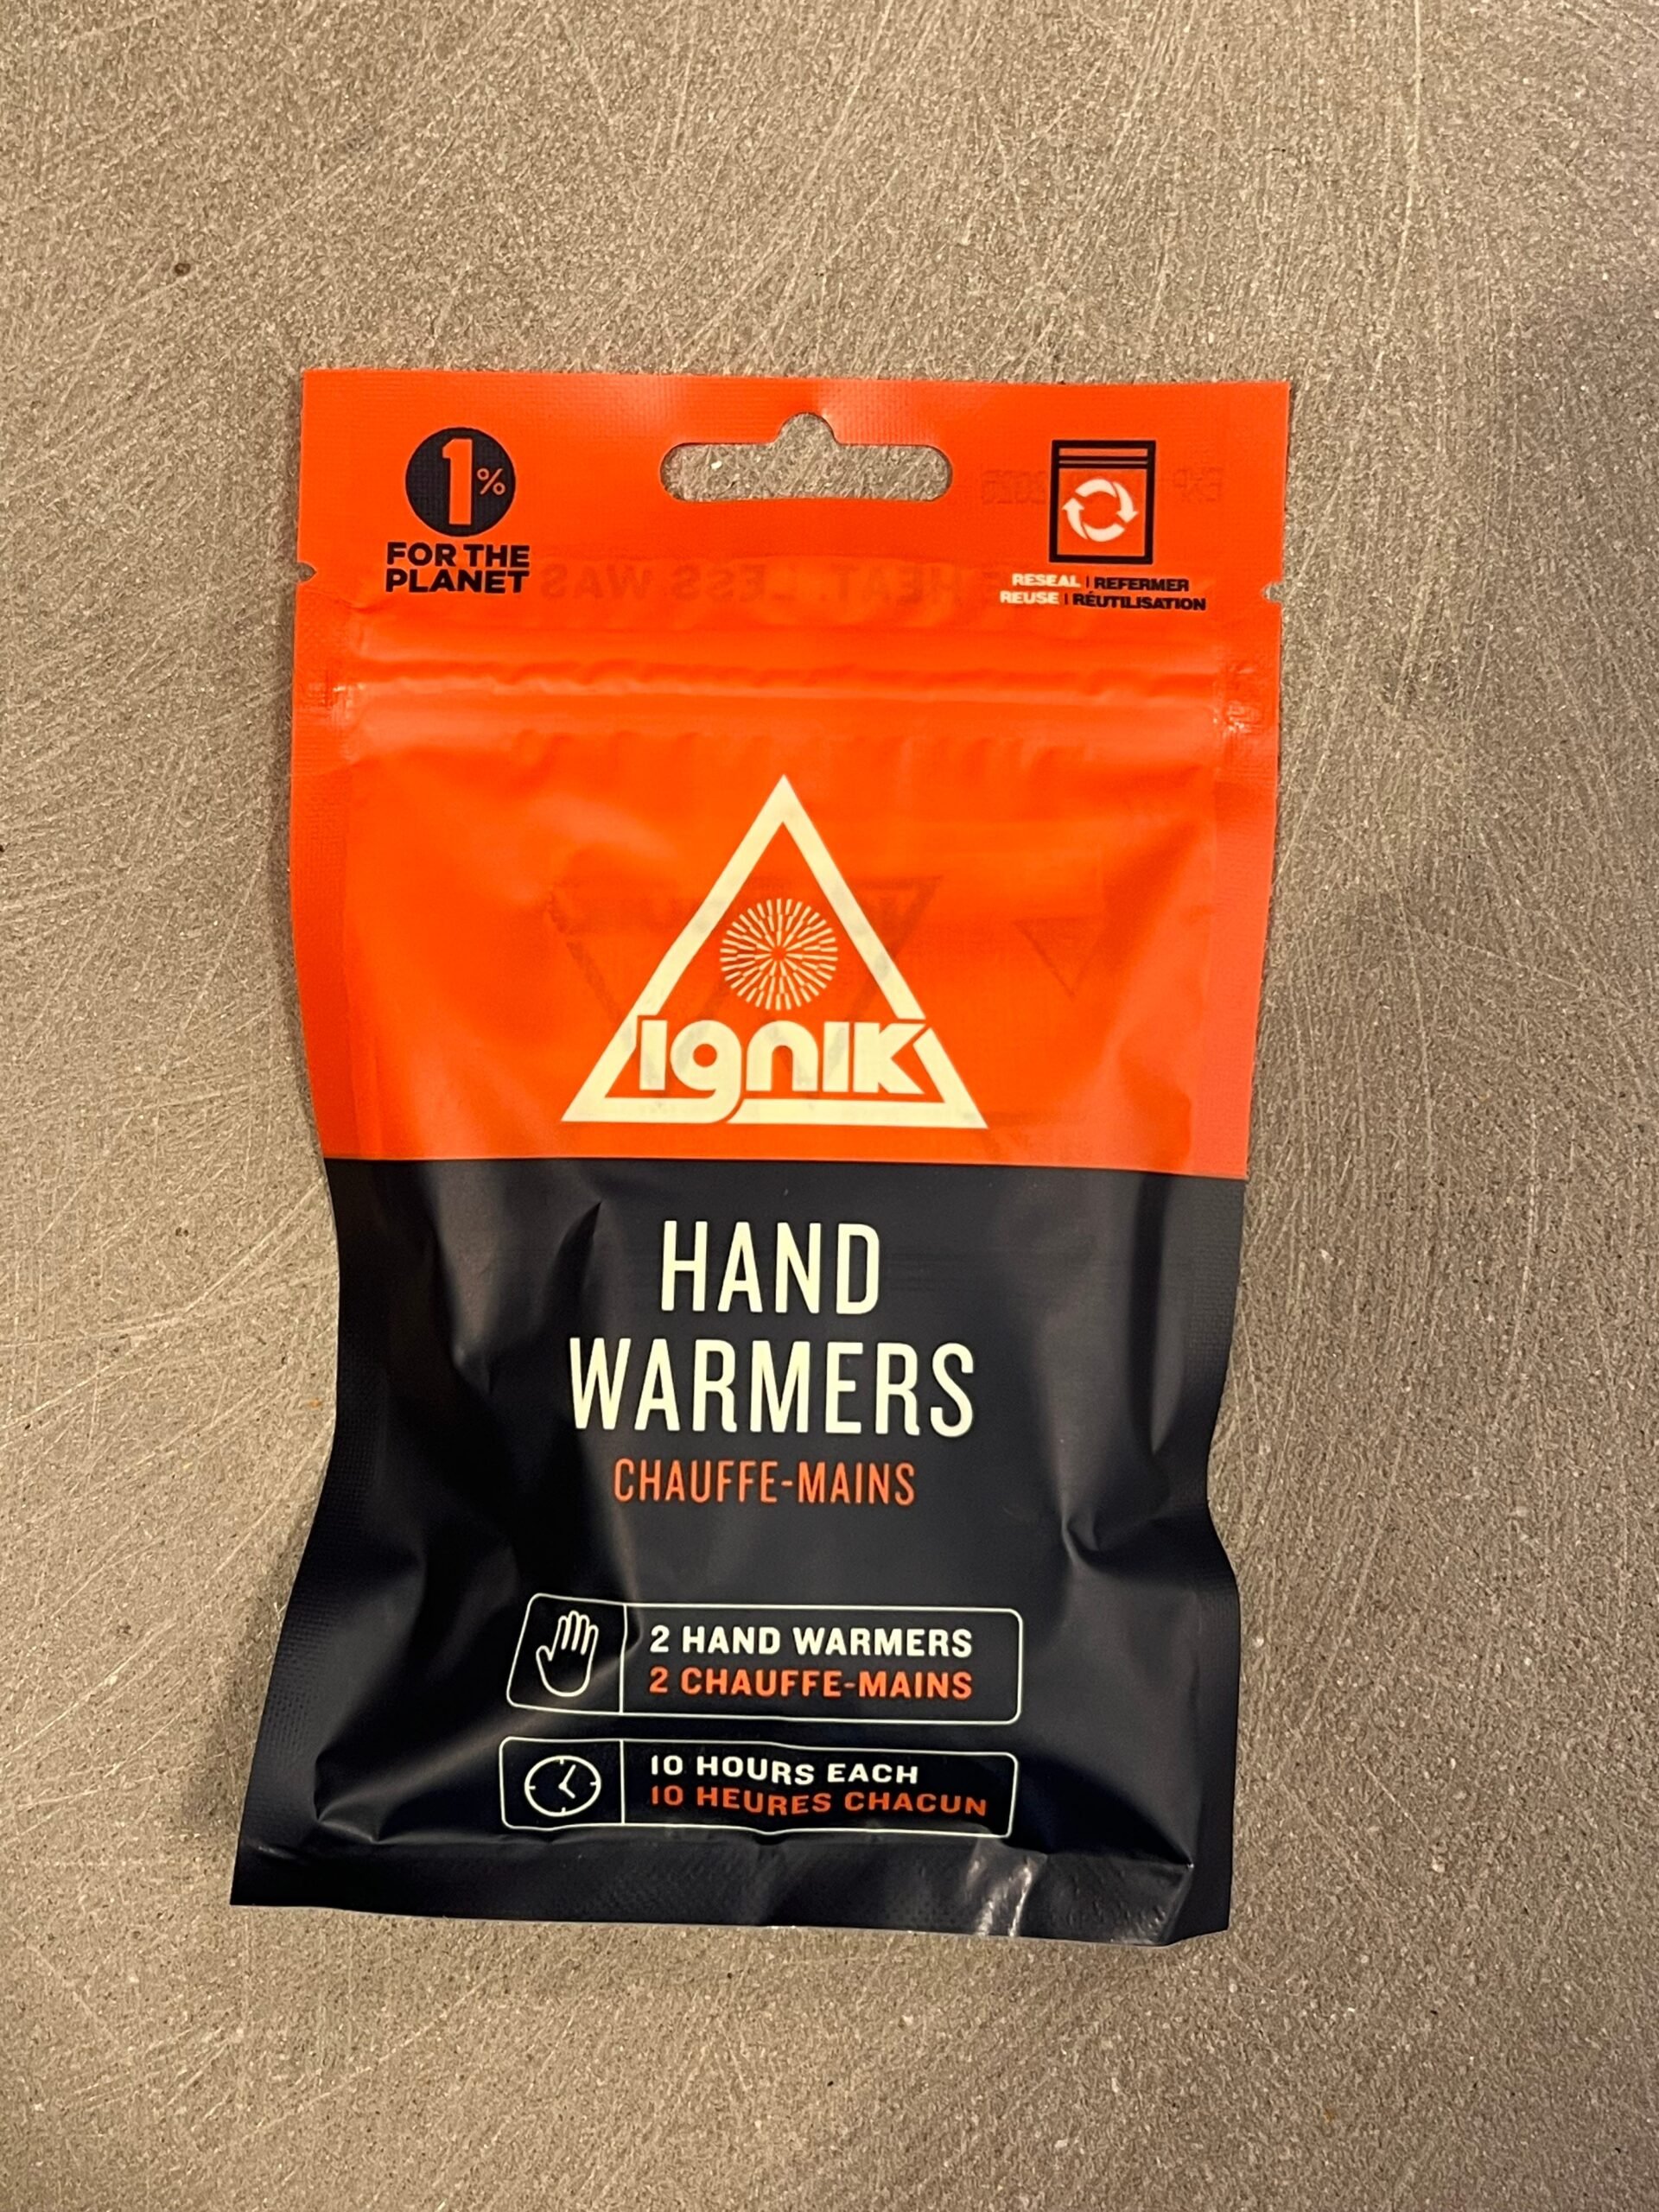 Hand warmers packing tips for ski trips